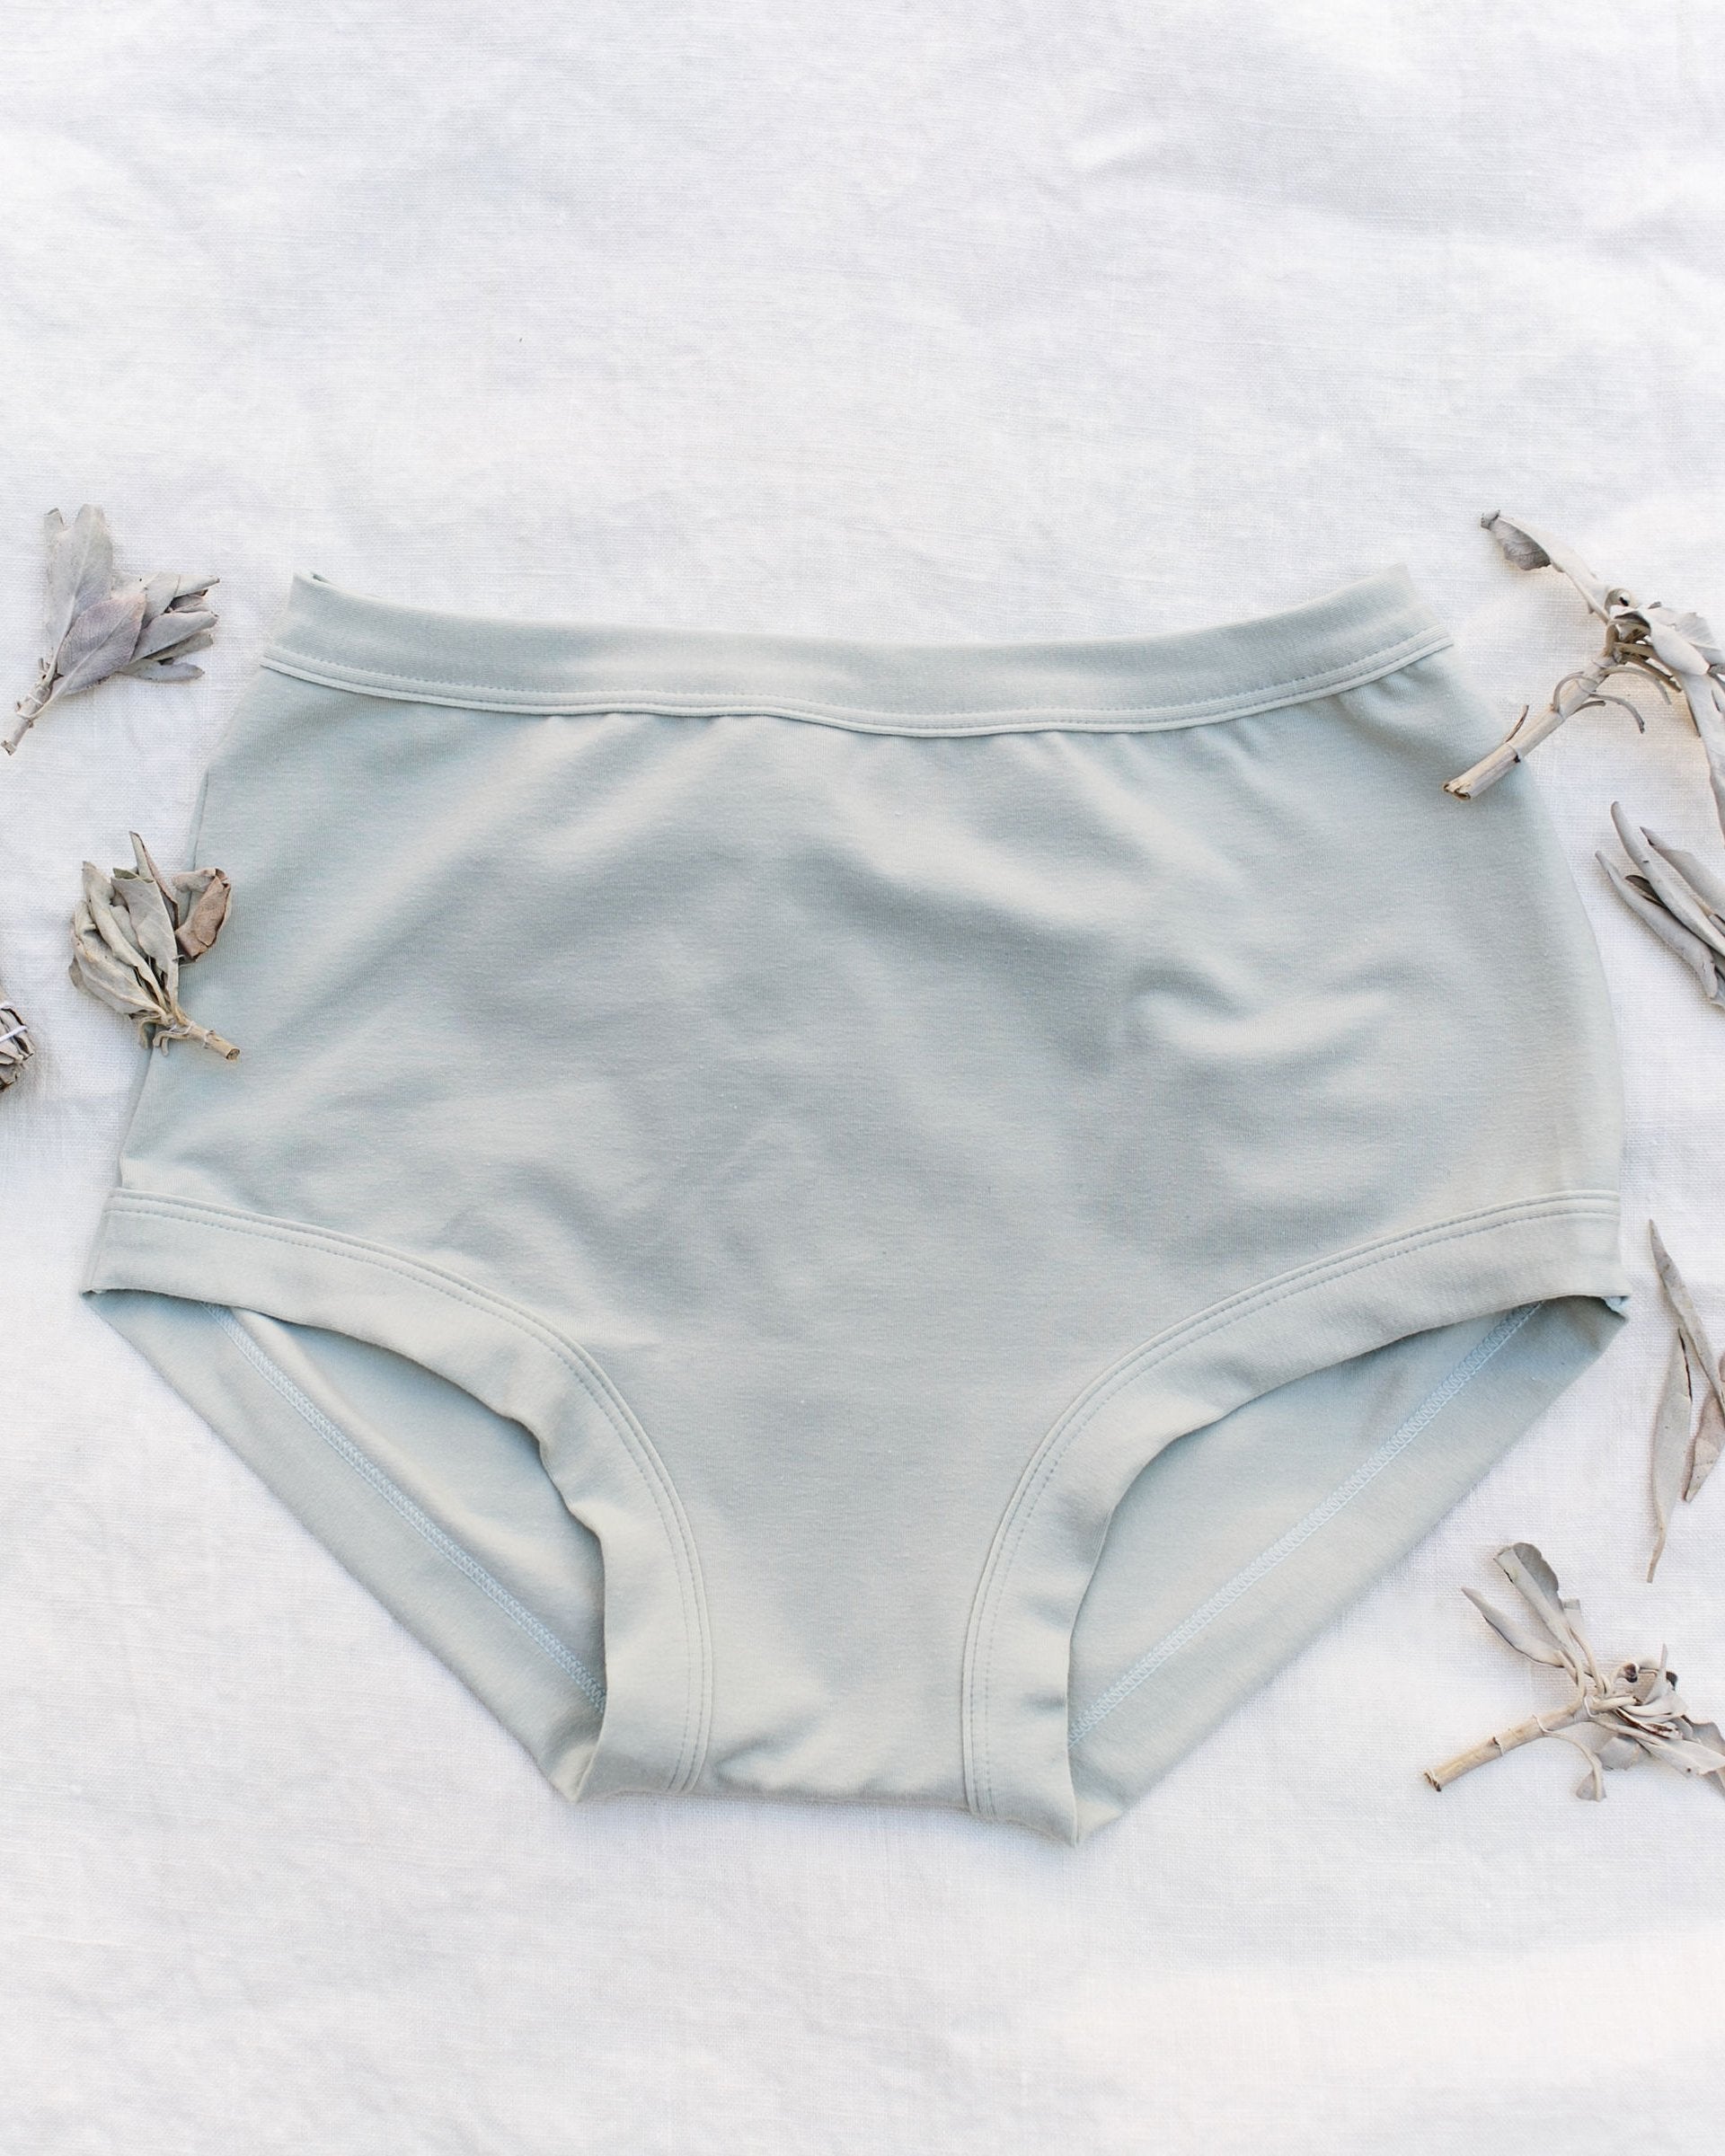 Flat lay of Thunderpants organic cotton Original style underwear in plain dried sage.